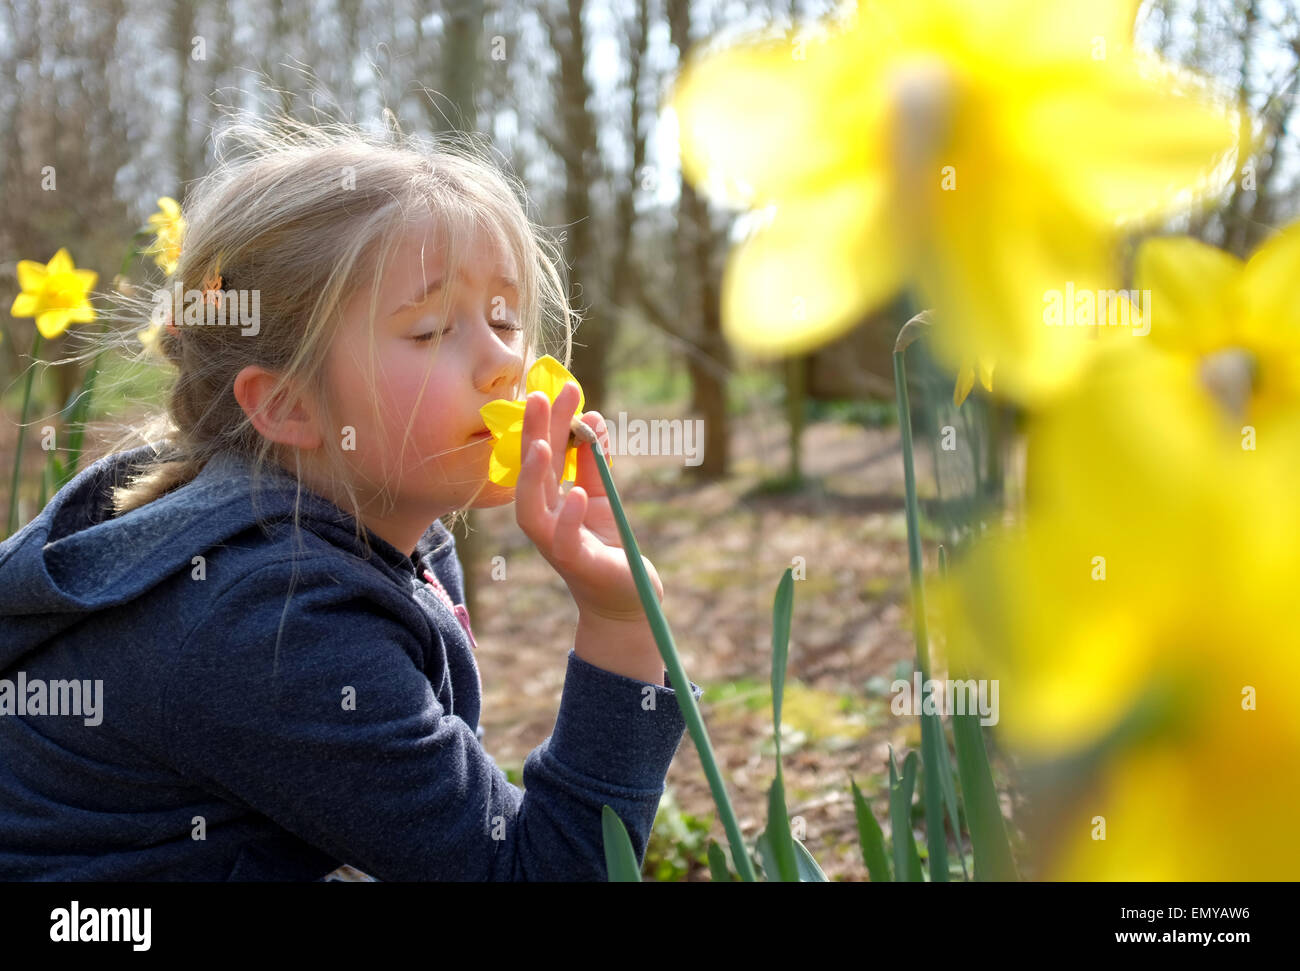 Young girl smelling flowers daffodils in the spring Stock Photo